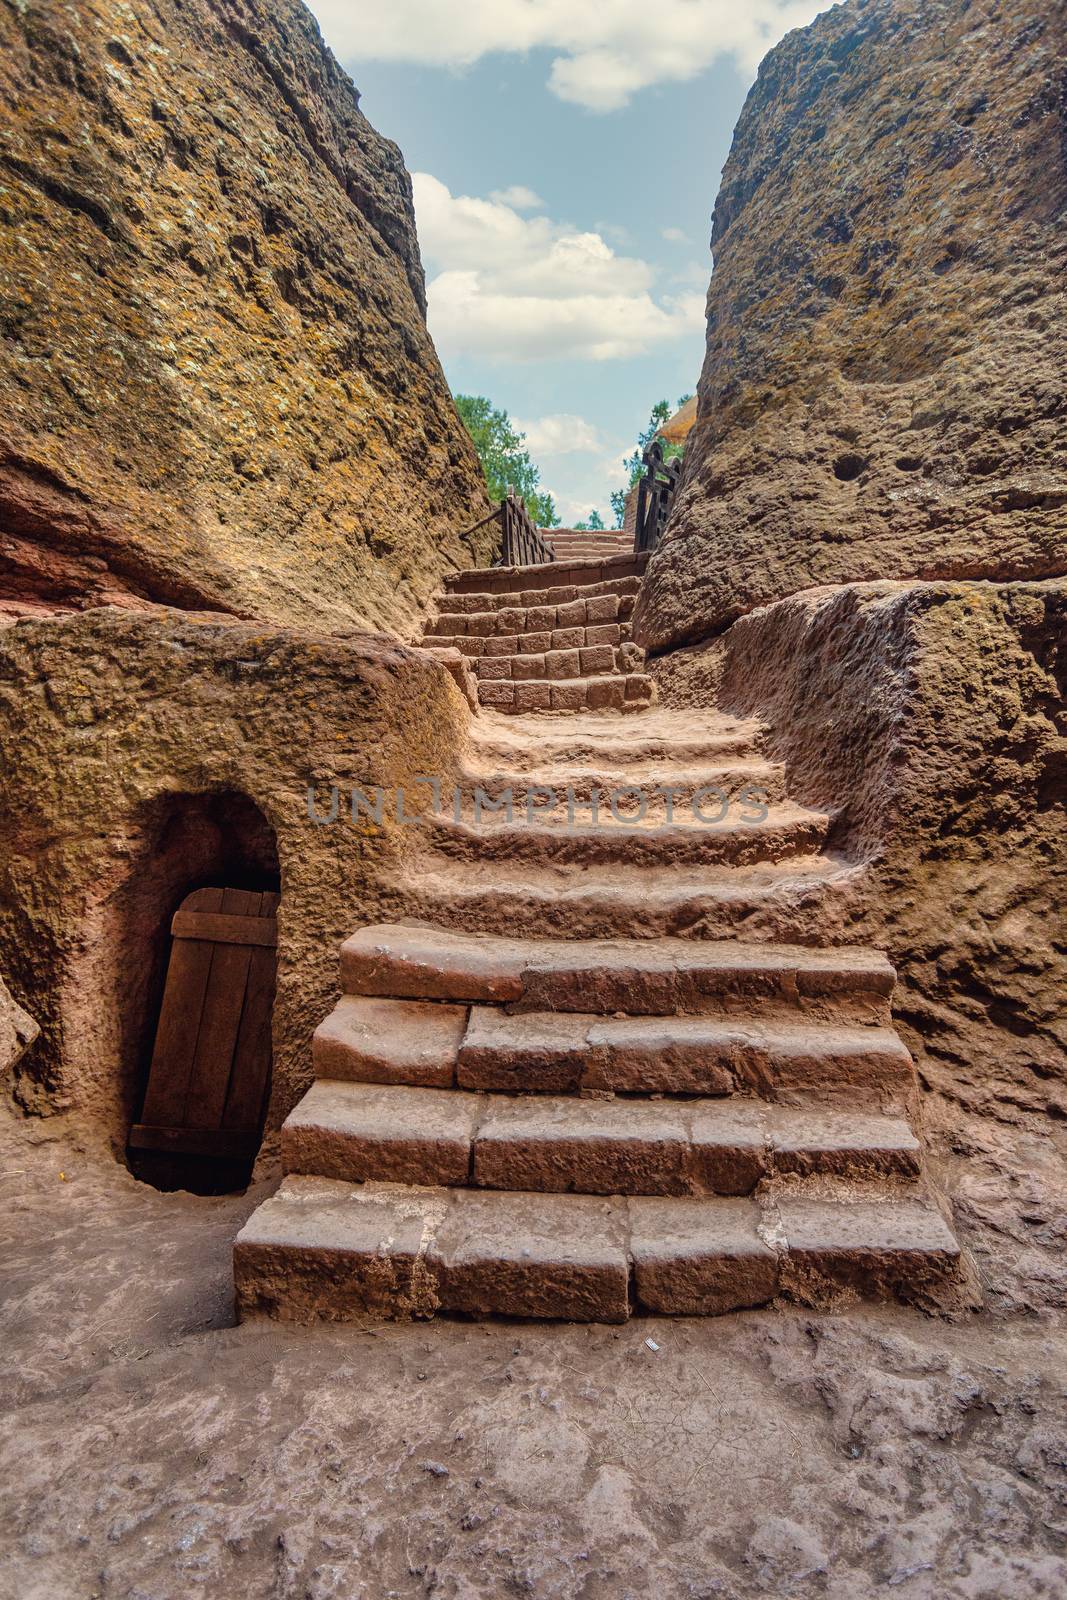 exterior labyrinths with stairs between LaLibela churches in Ethiopia carved out of the bedrock. UNESCO World Heritage Site, Lalibela Ethiopia, Africa